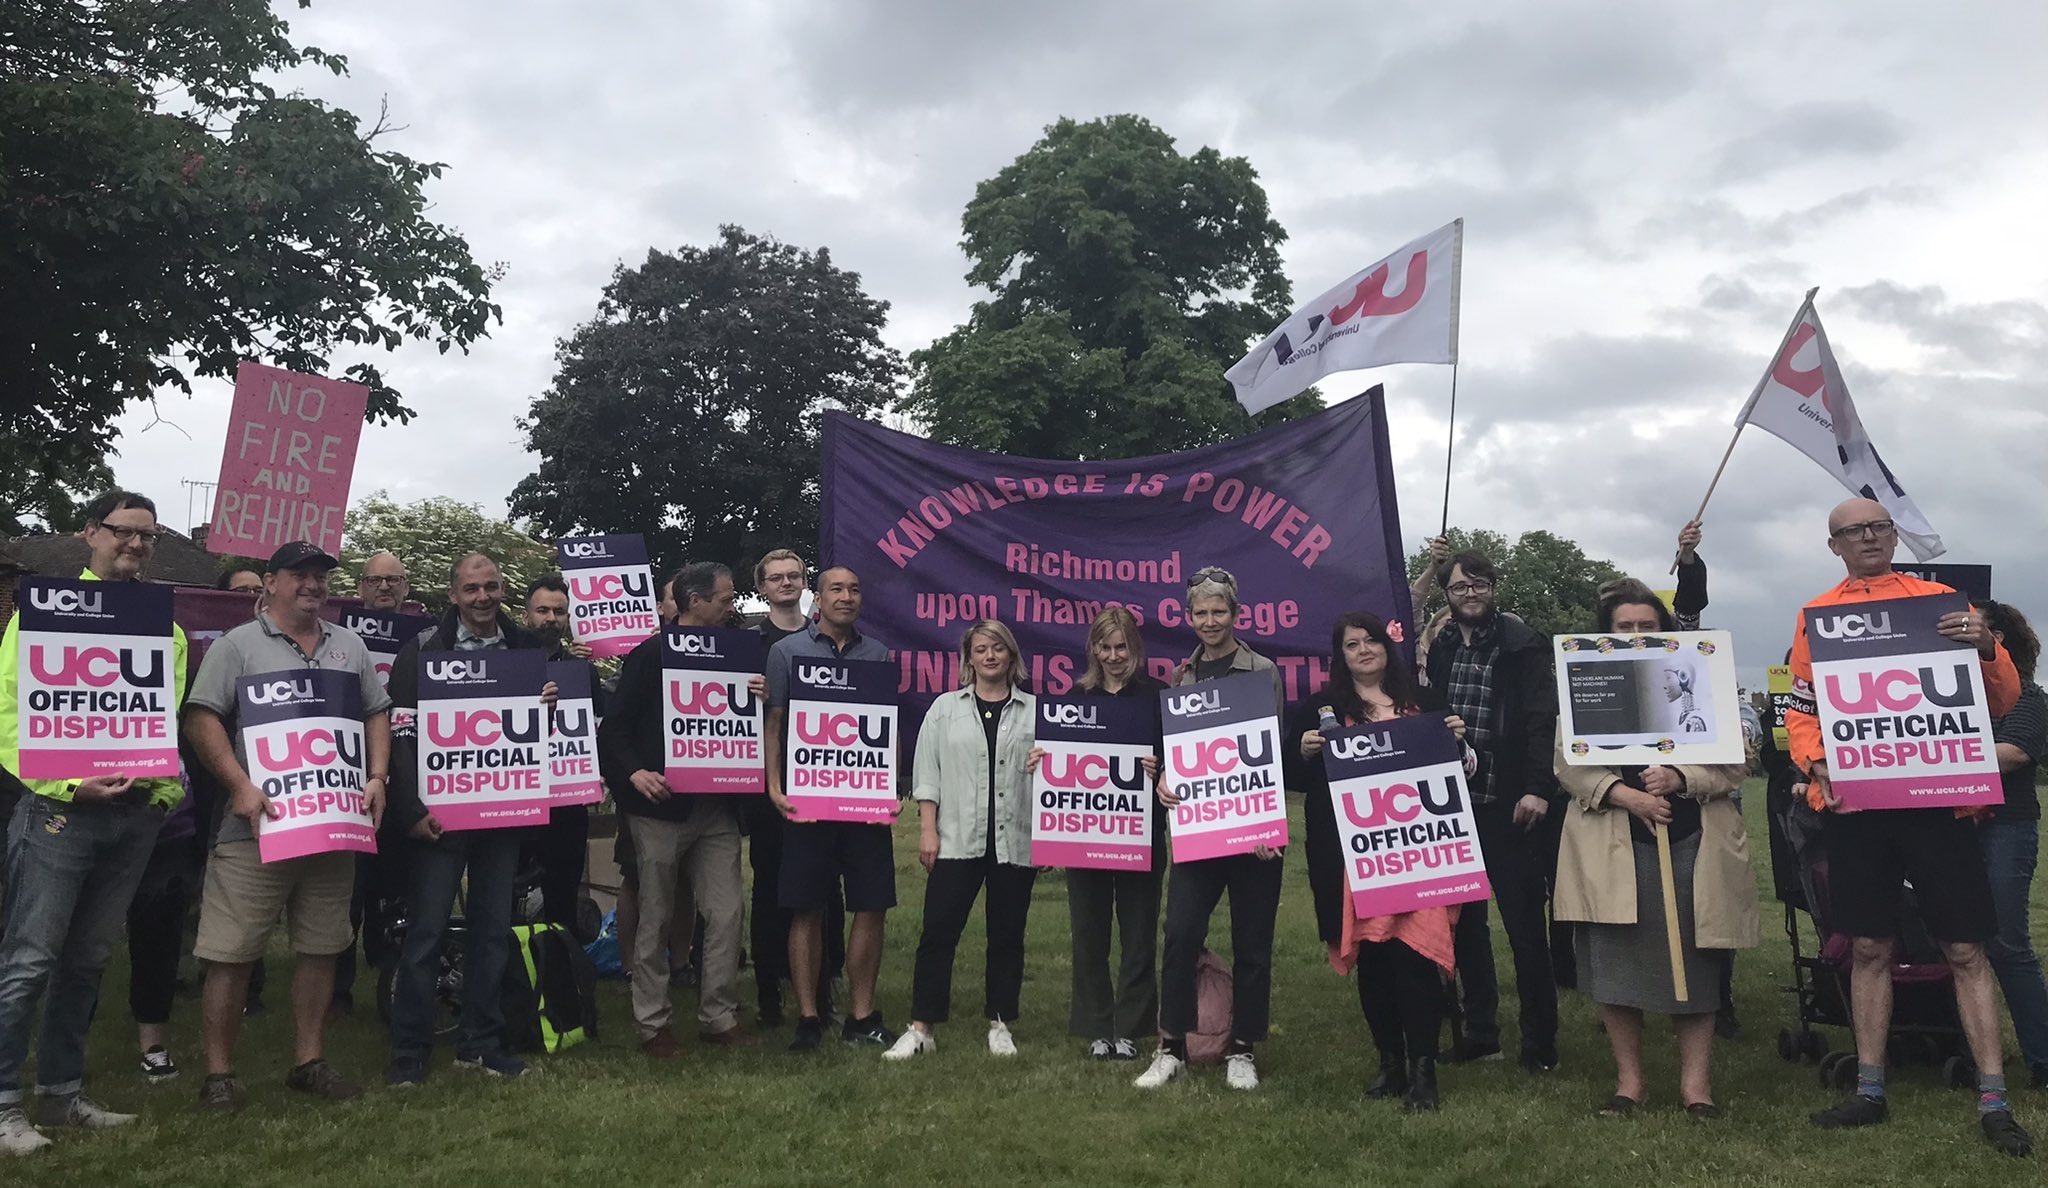 UCU members rally outside Richmond upon Thames College on 23 May. Credit: UCU